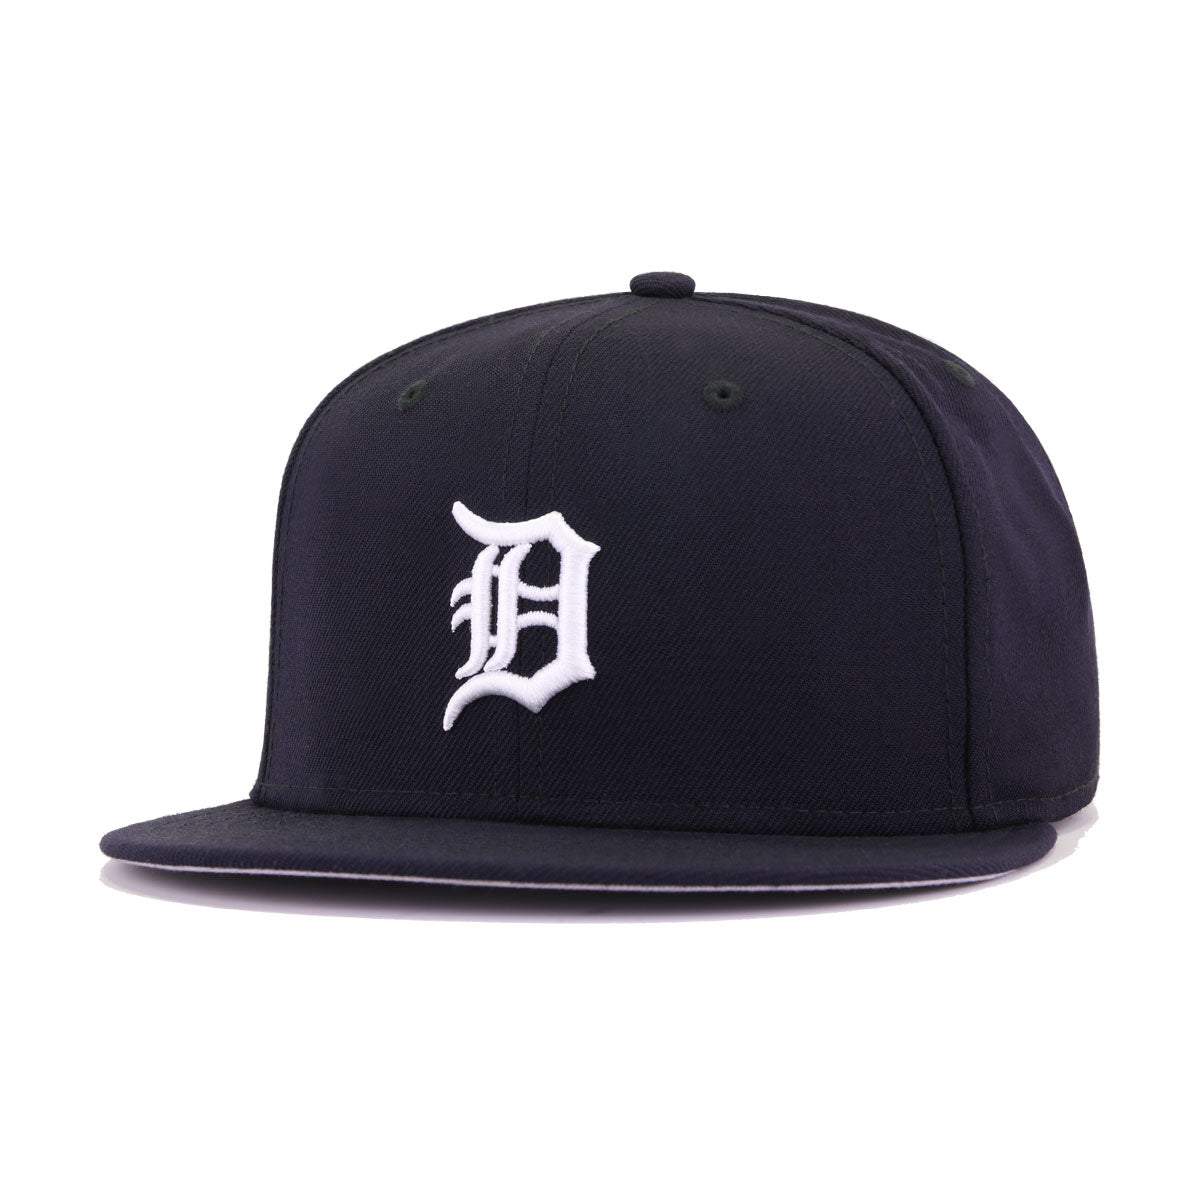 Detroit Tigers FABULOUS White-Red Fitted Hat by New Era